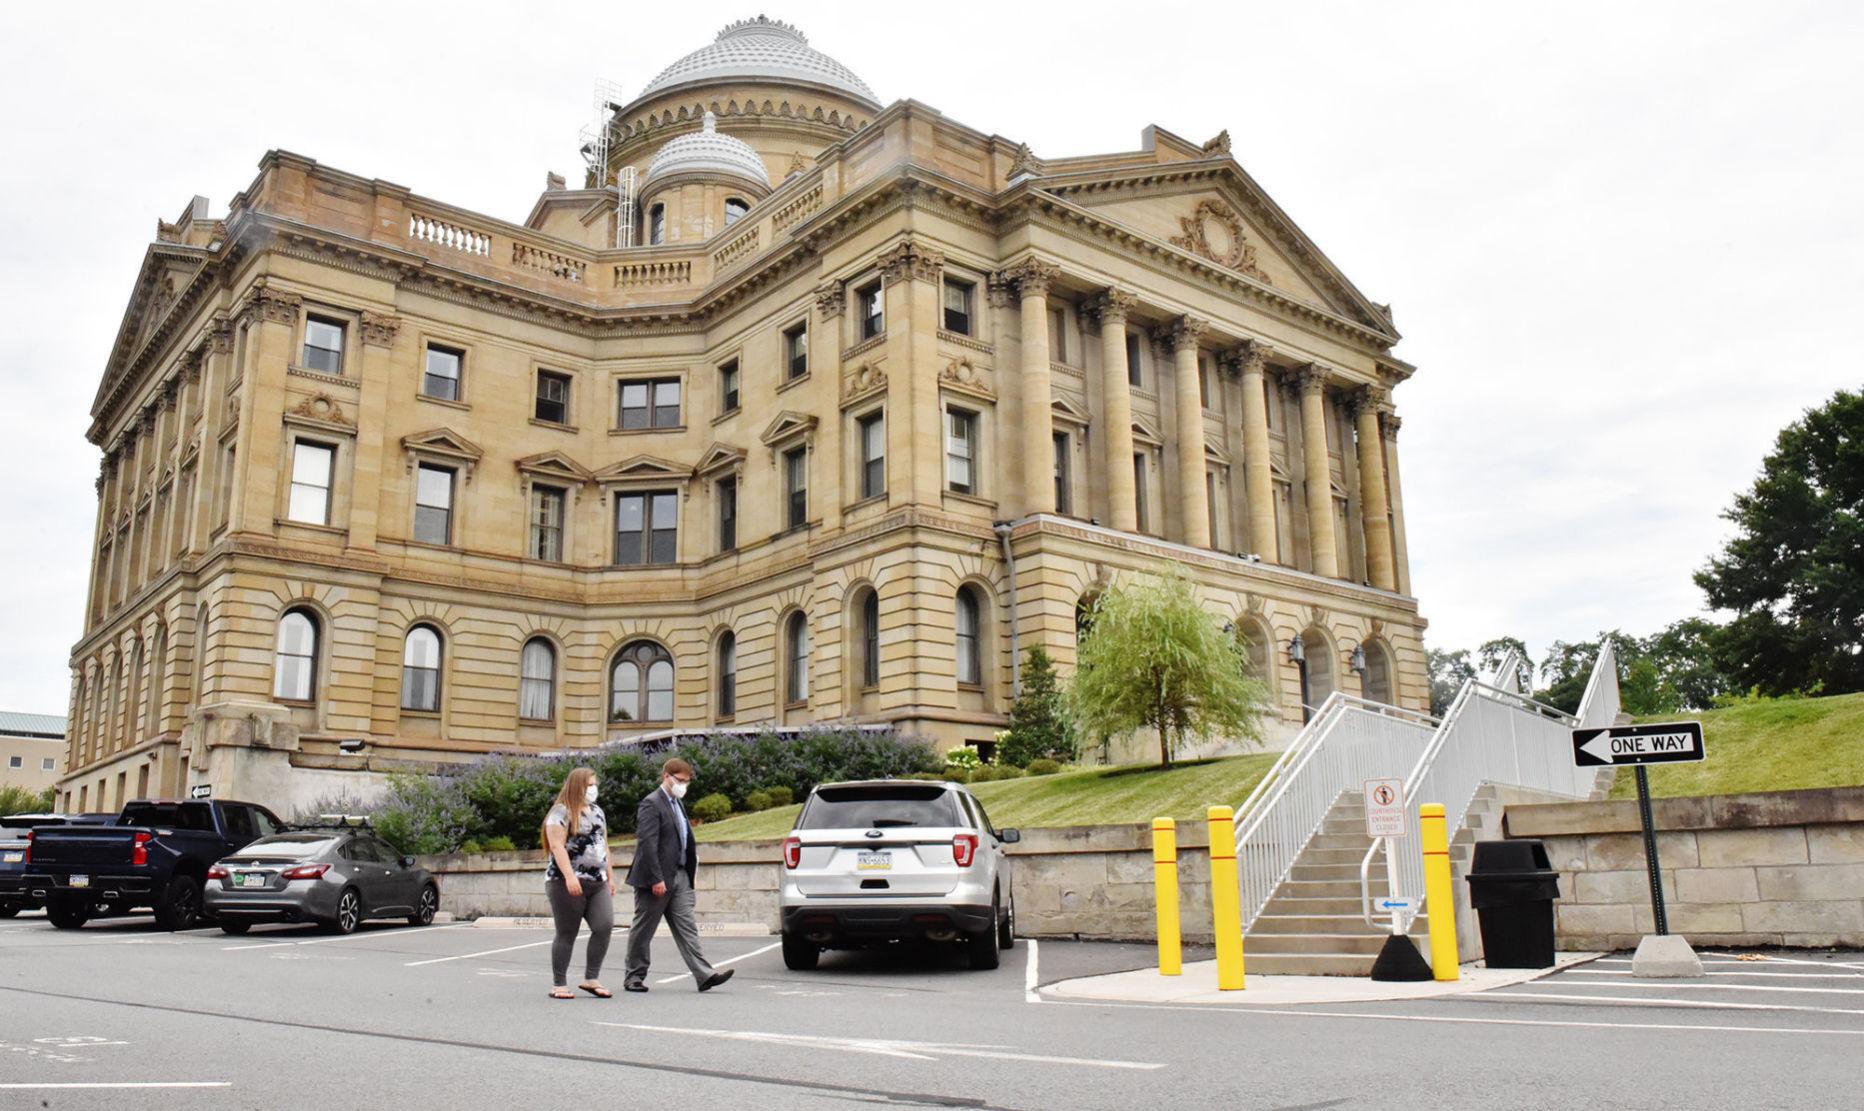 Passport applications will be accepted at Luzerne County Courthouse